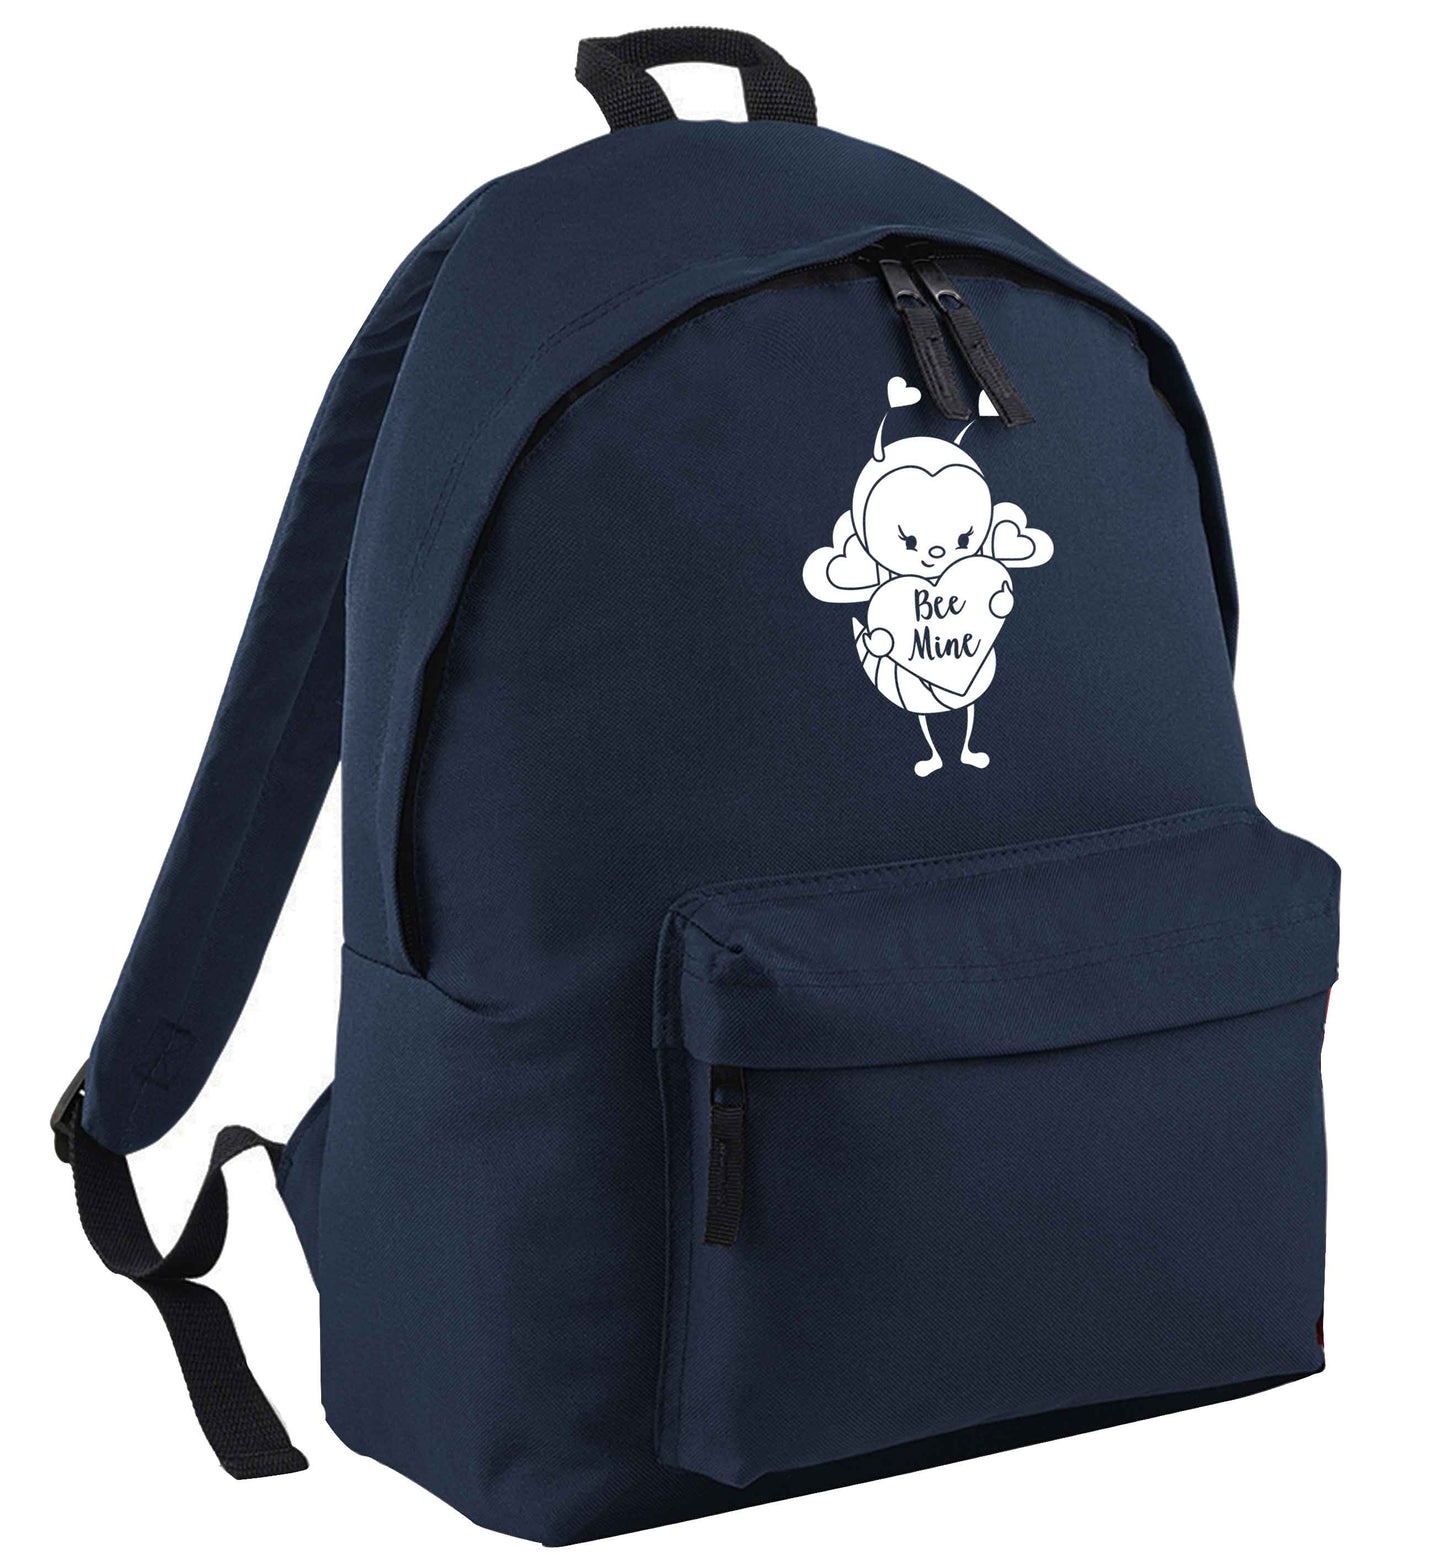 Bee mine navy adults backpack